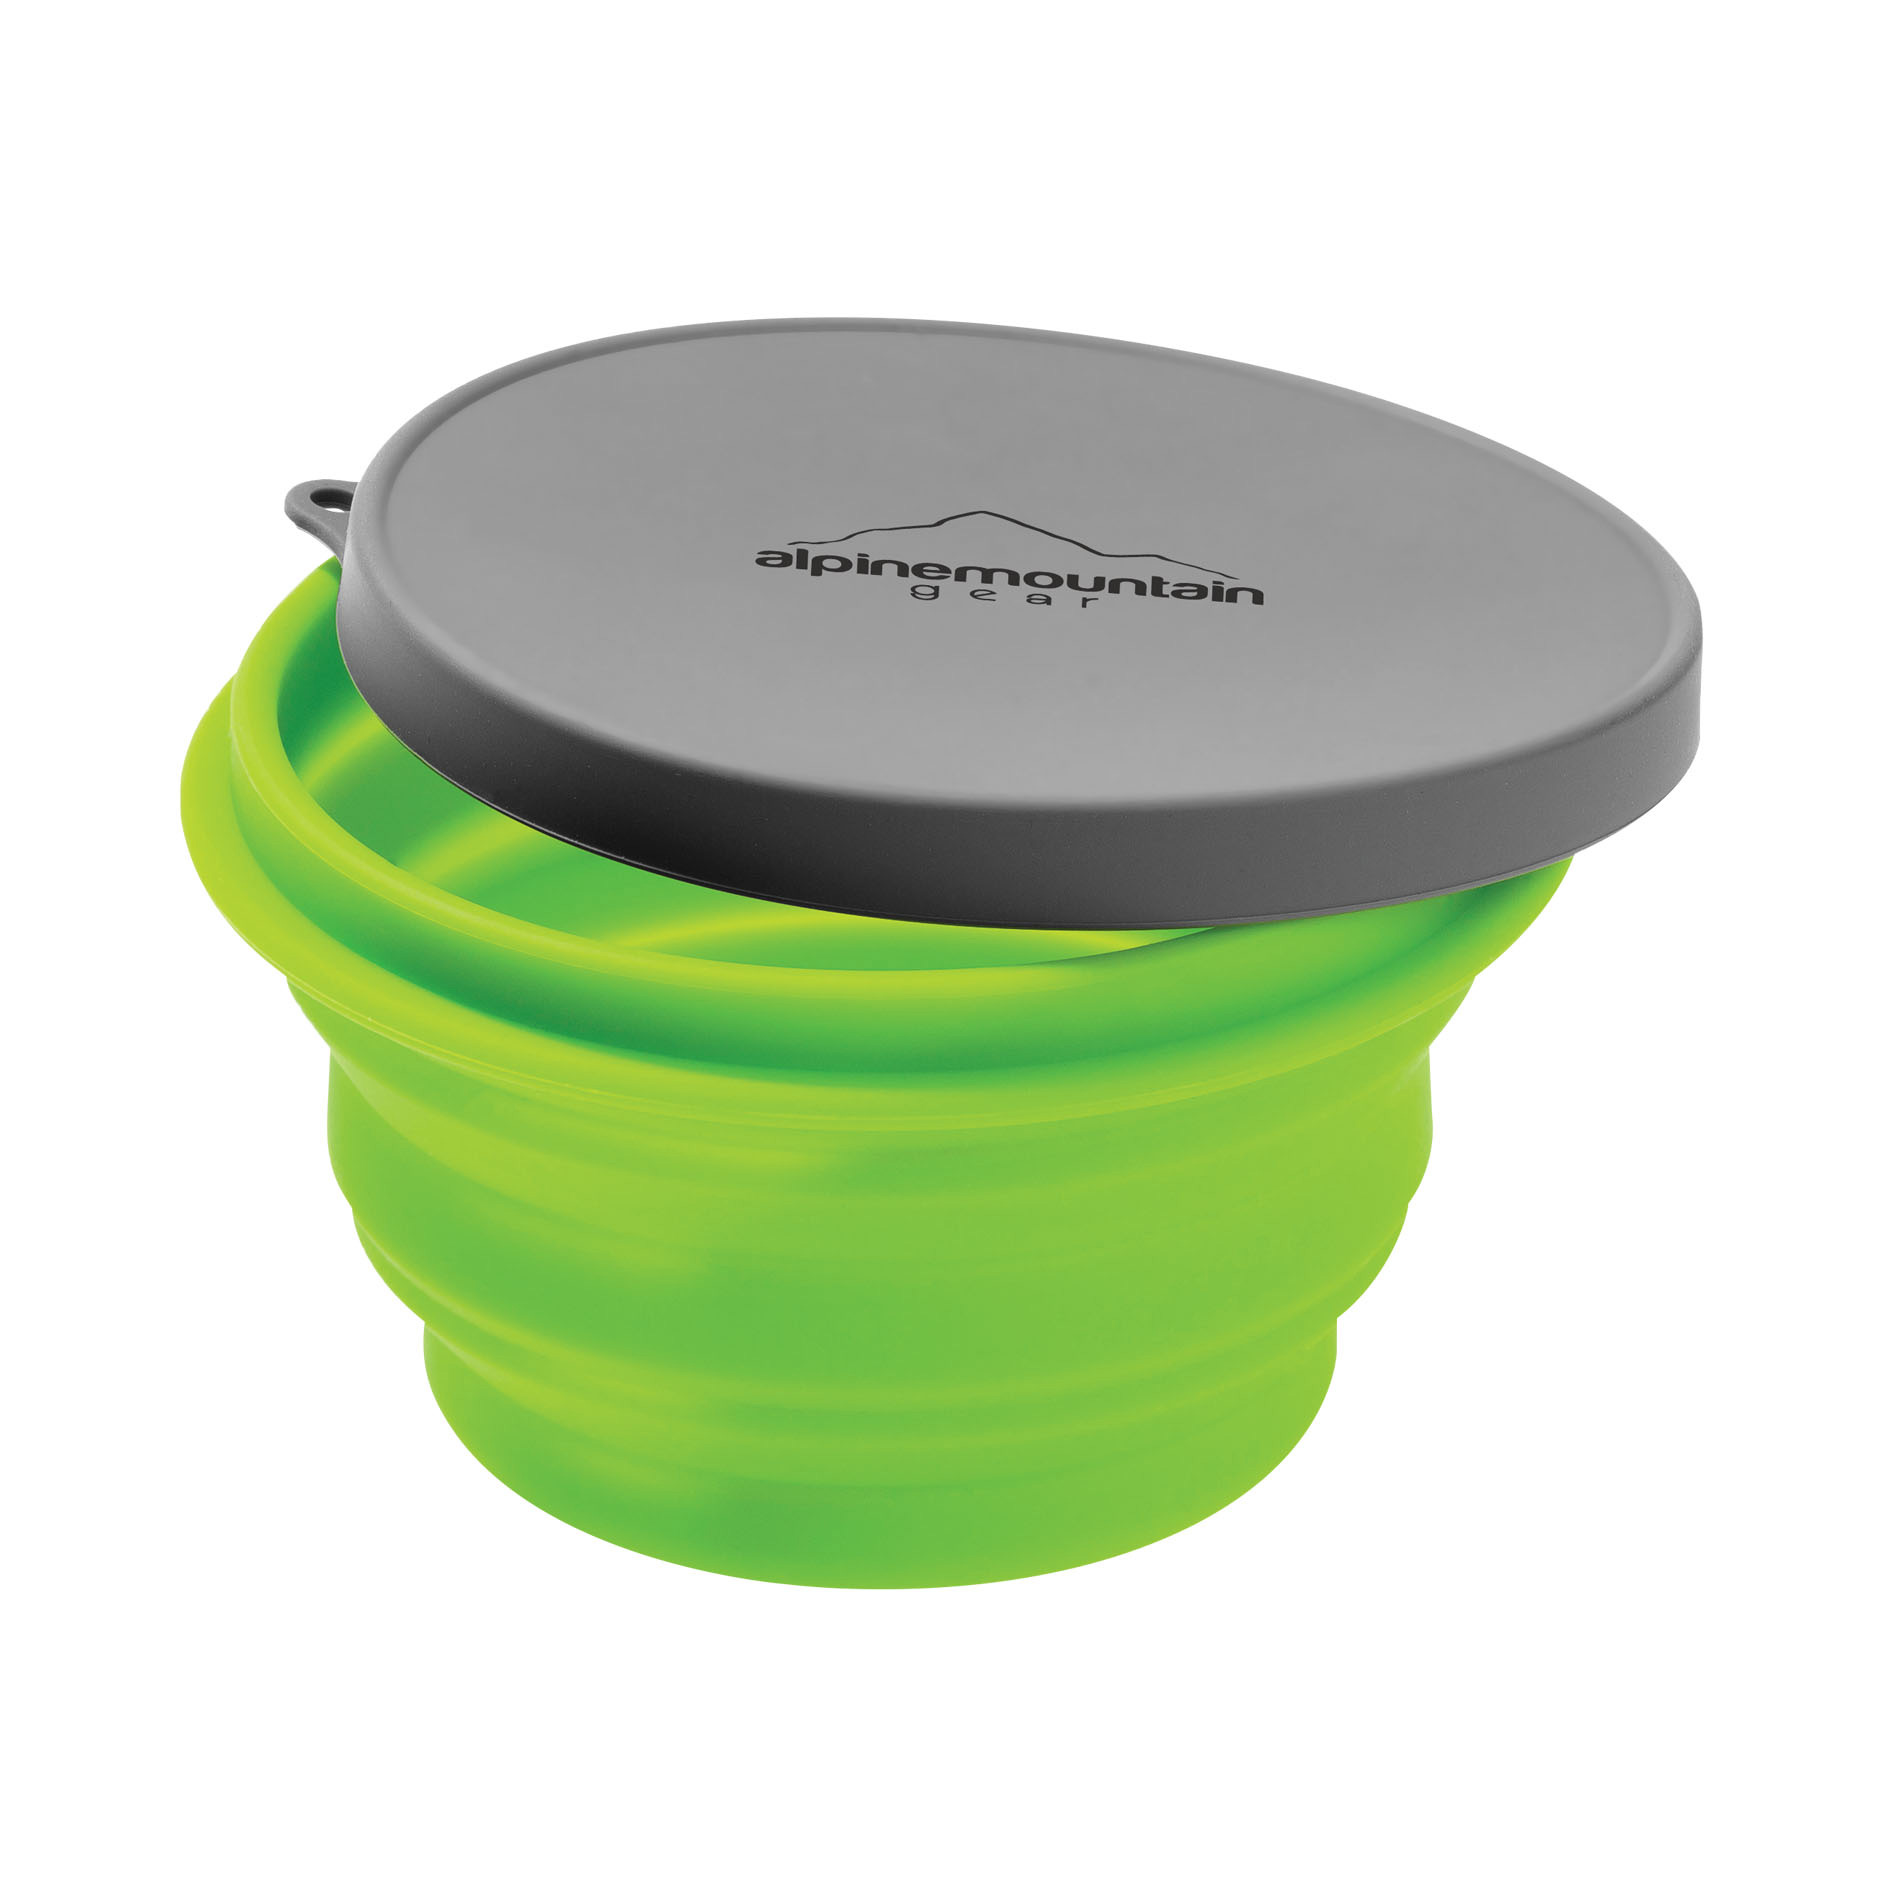 https://op1.0ps.us/original/opplanet-alpine-mountain-gear-medium-collapsible-silicone-container-with-lid-green-amgcsb-m-3it-main